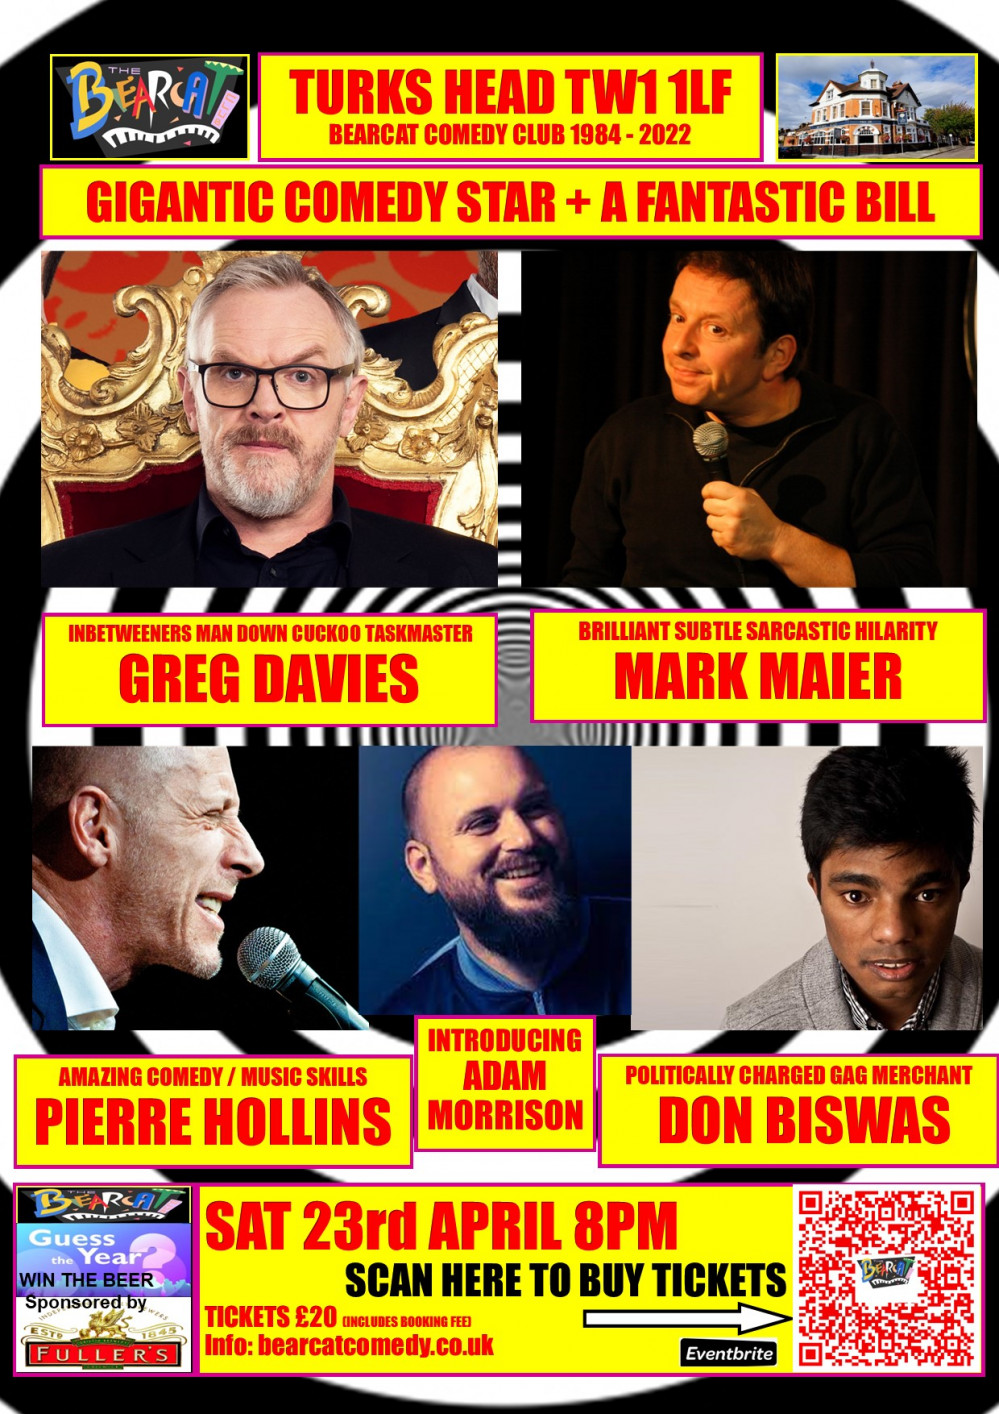 Brilliant stand-up, comedy actor and the host of Taskmaster, Greg Davies, who is used to filling theatres, tops the bill.